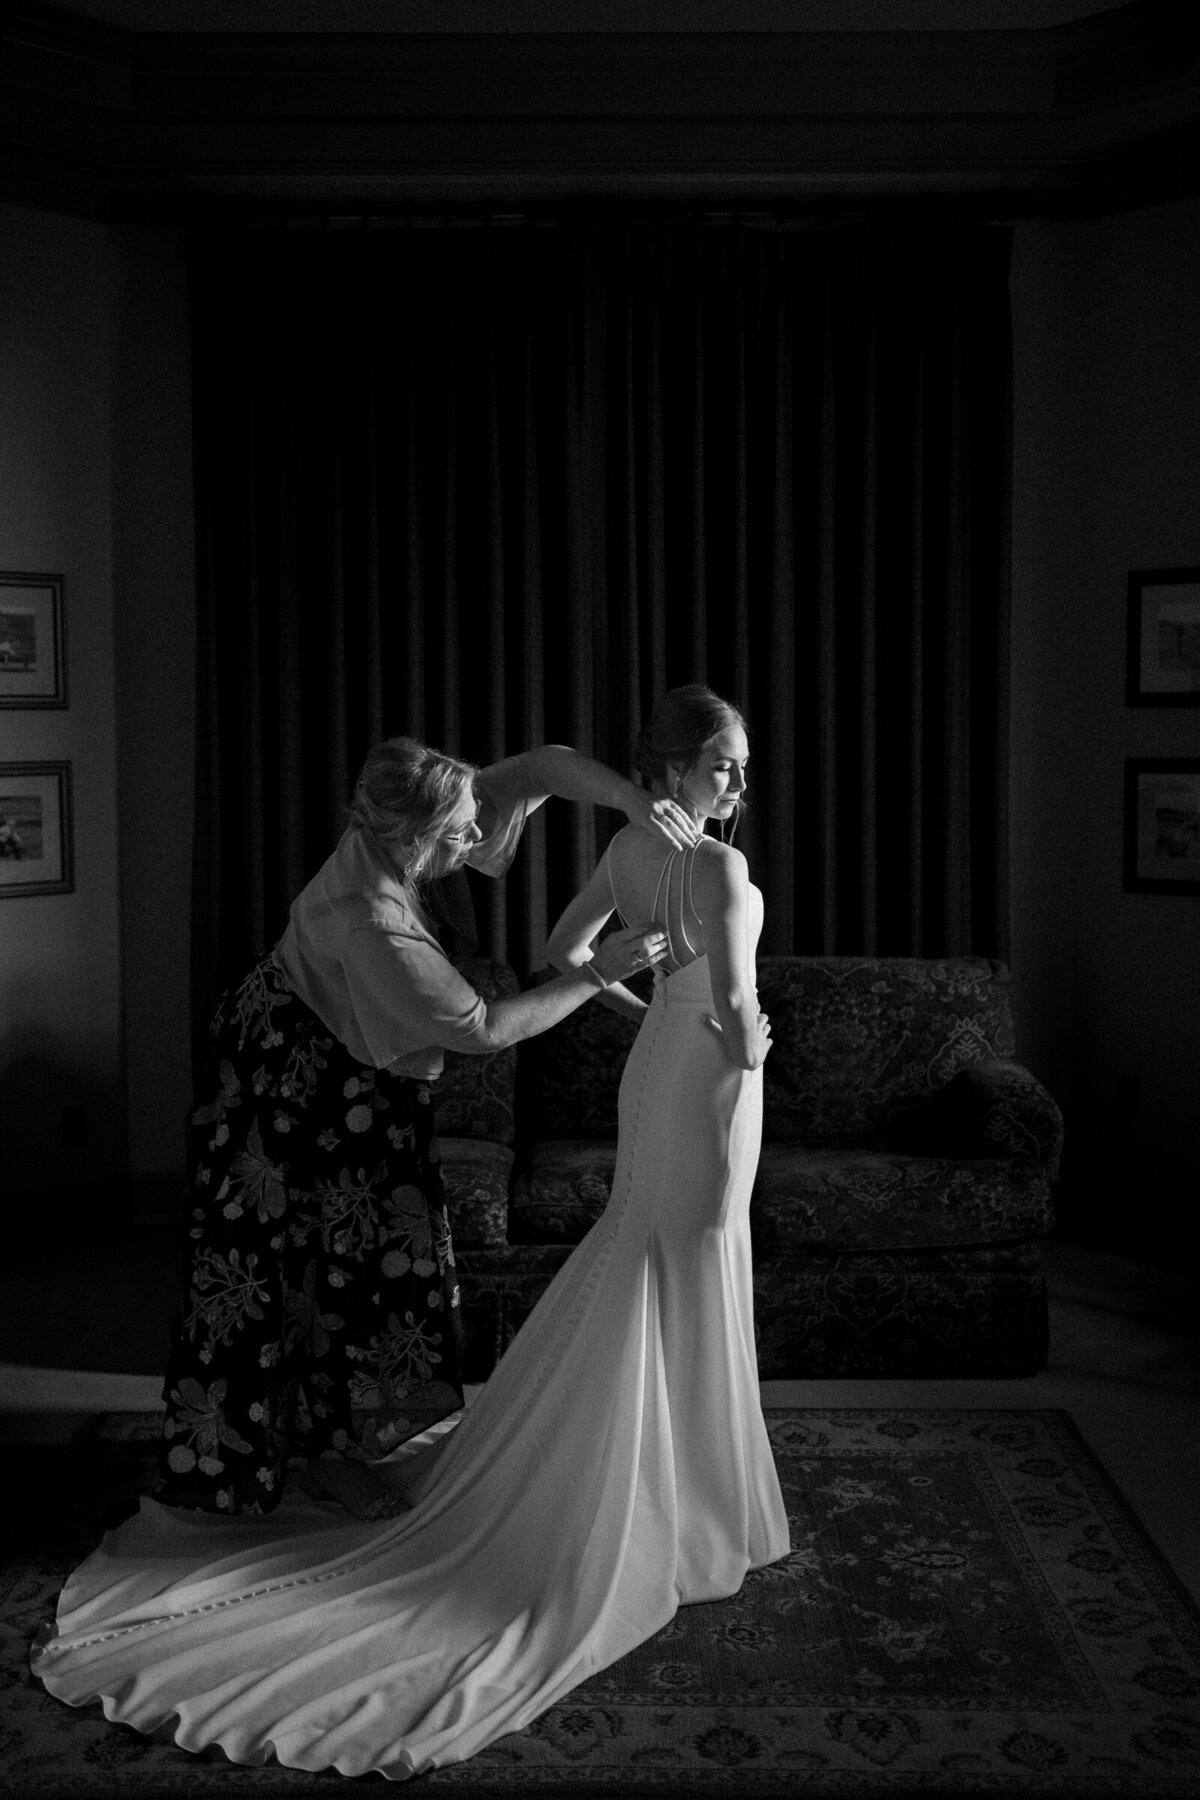 An elegant black and white photo captures a bride being assisted with her dress by a bridesmaid